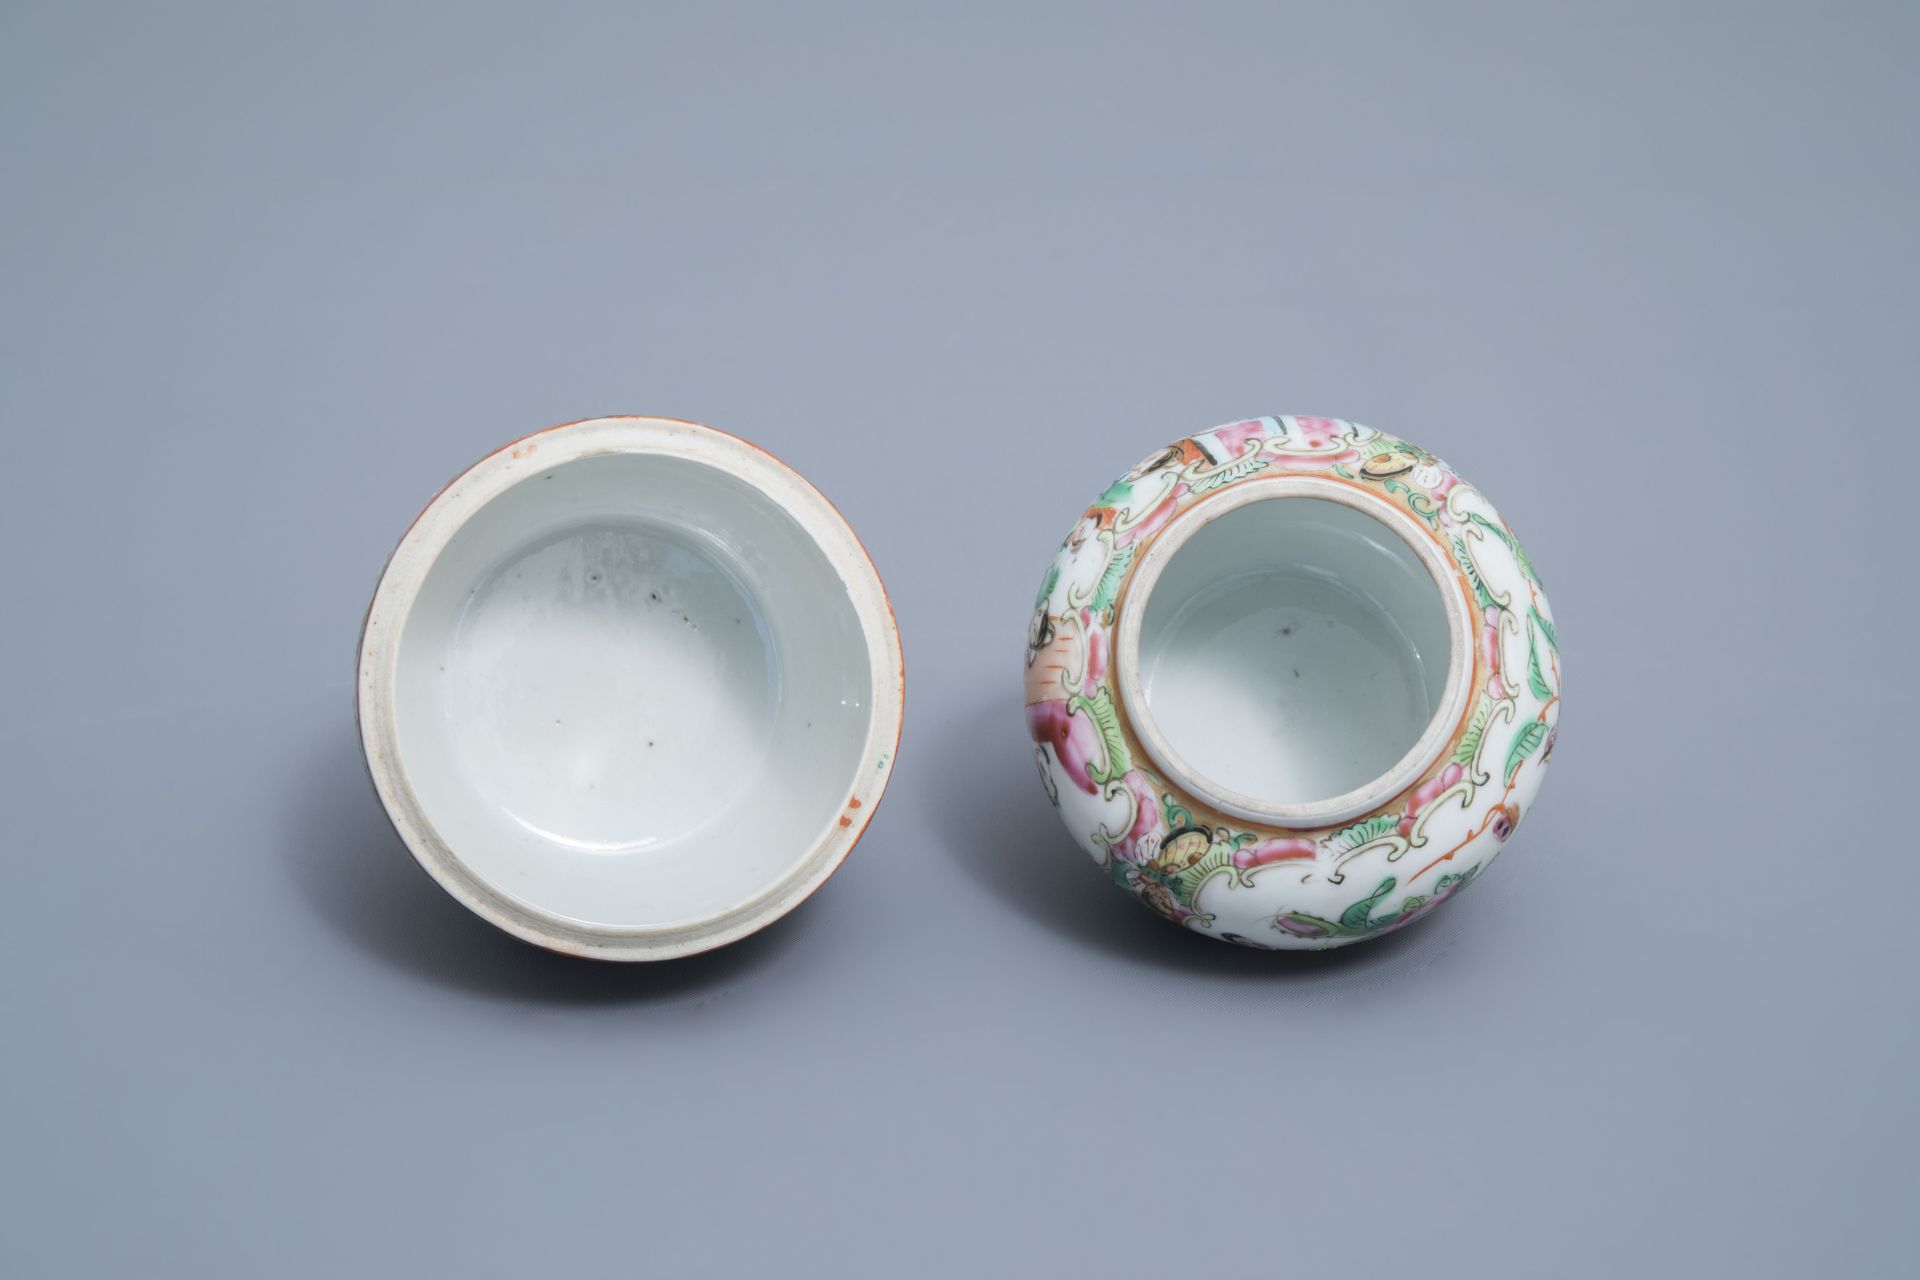 A varied collection of Chinse Canton and famille rose porcelain, 19th C. - Image 19 of 19